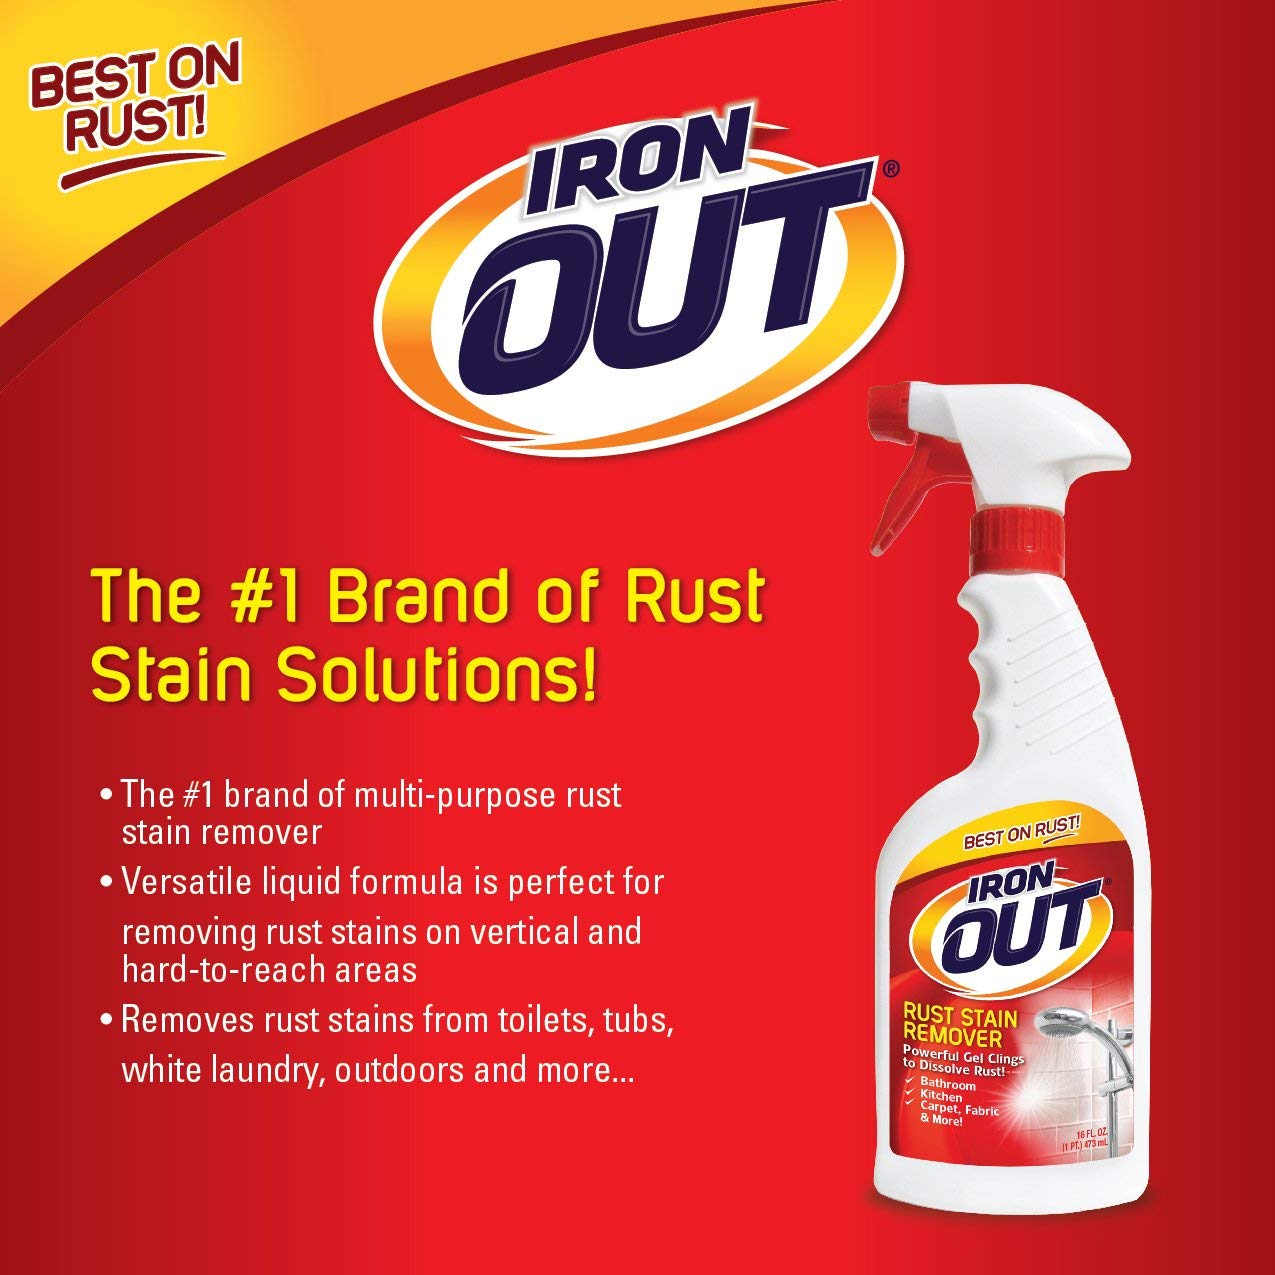 Iron OUT Spray Gel Rust Stain Remover, Remove and Prevent Rust Stains in Bathrooms, Kitchens, Appliances, Laundry, Outdoors, 16 Ounce